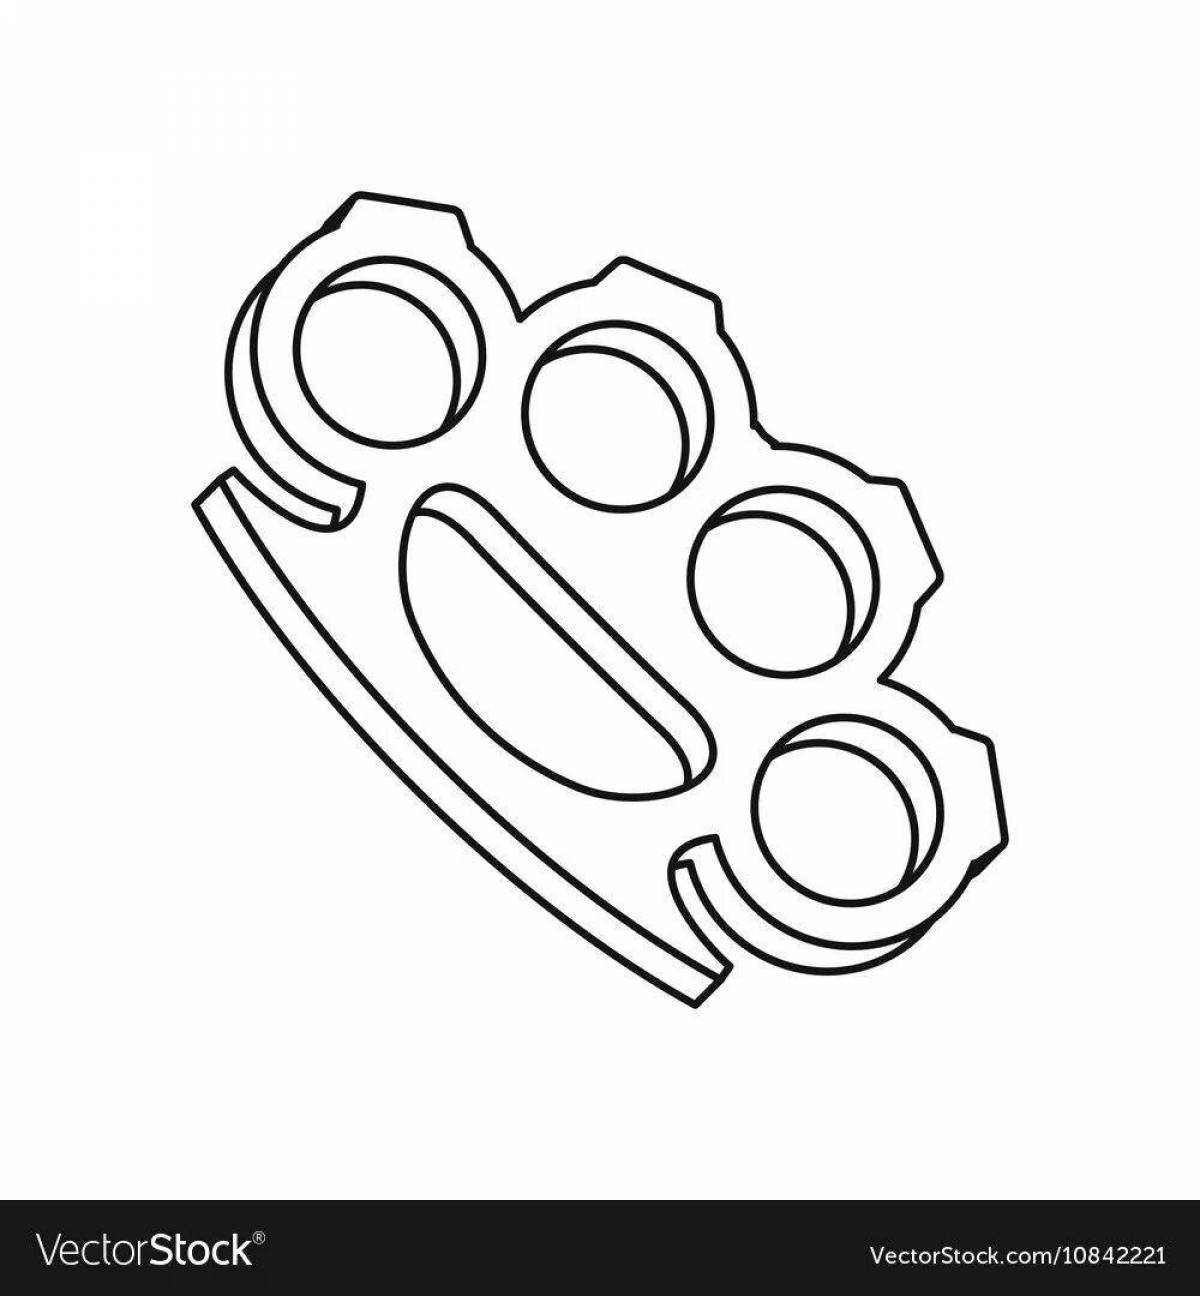 Coloring page decorated with brass knuckles